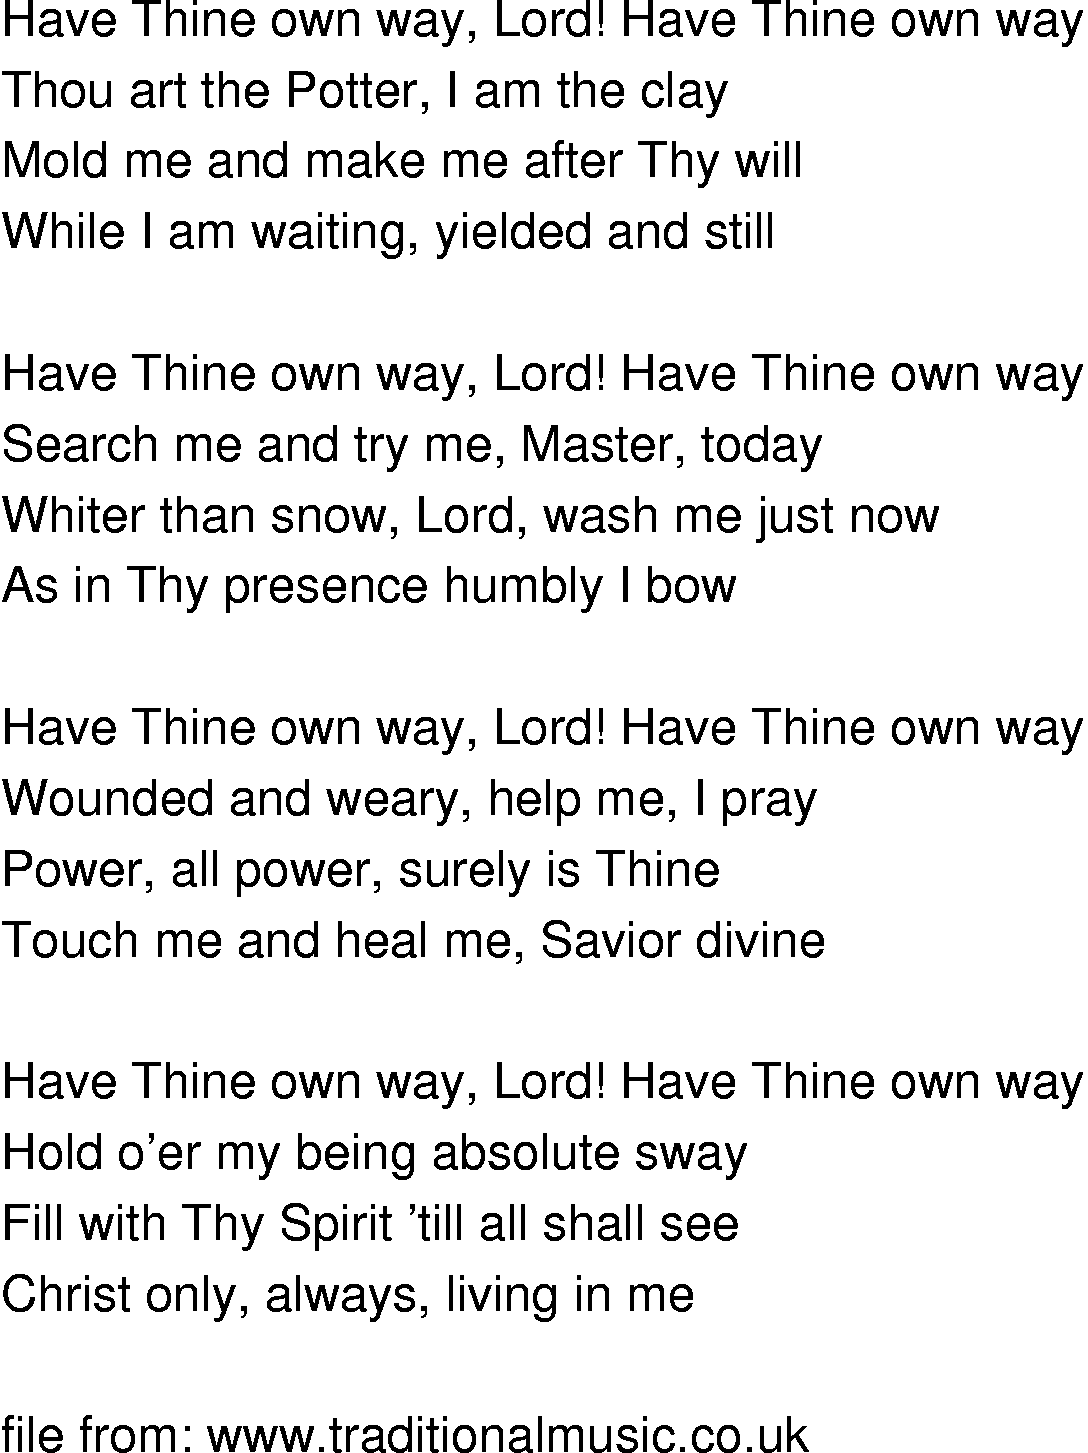 Old-Time (oldtimey) Song Lyrics - have thine own way